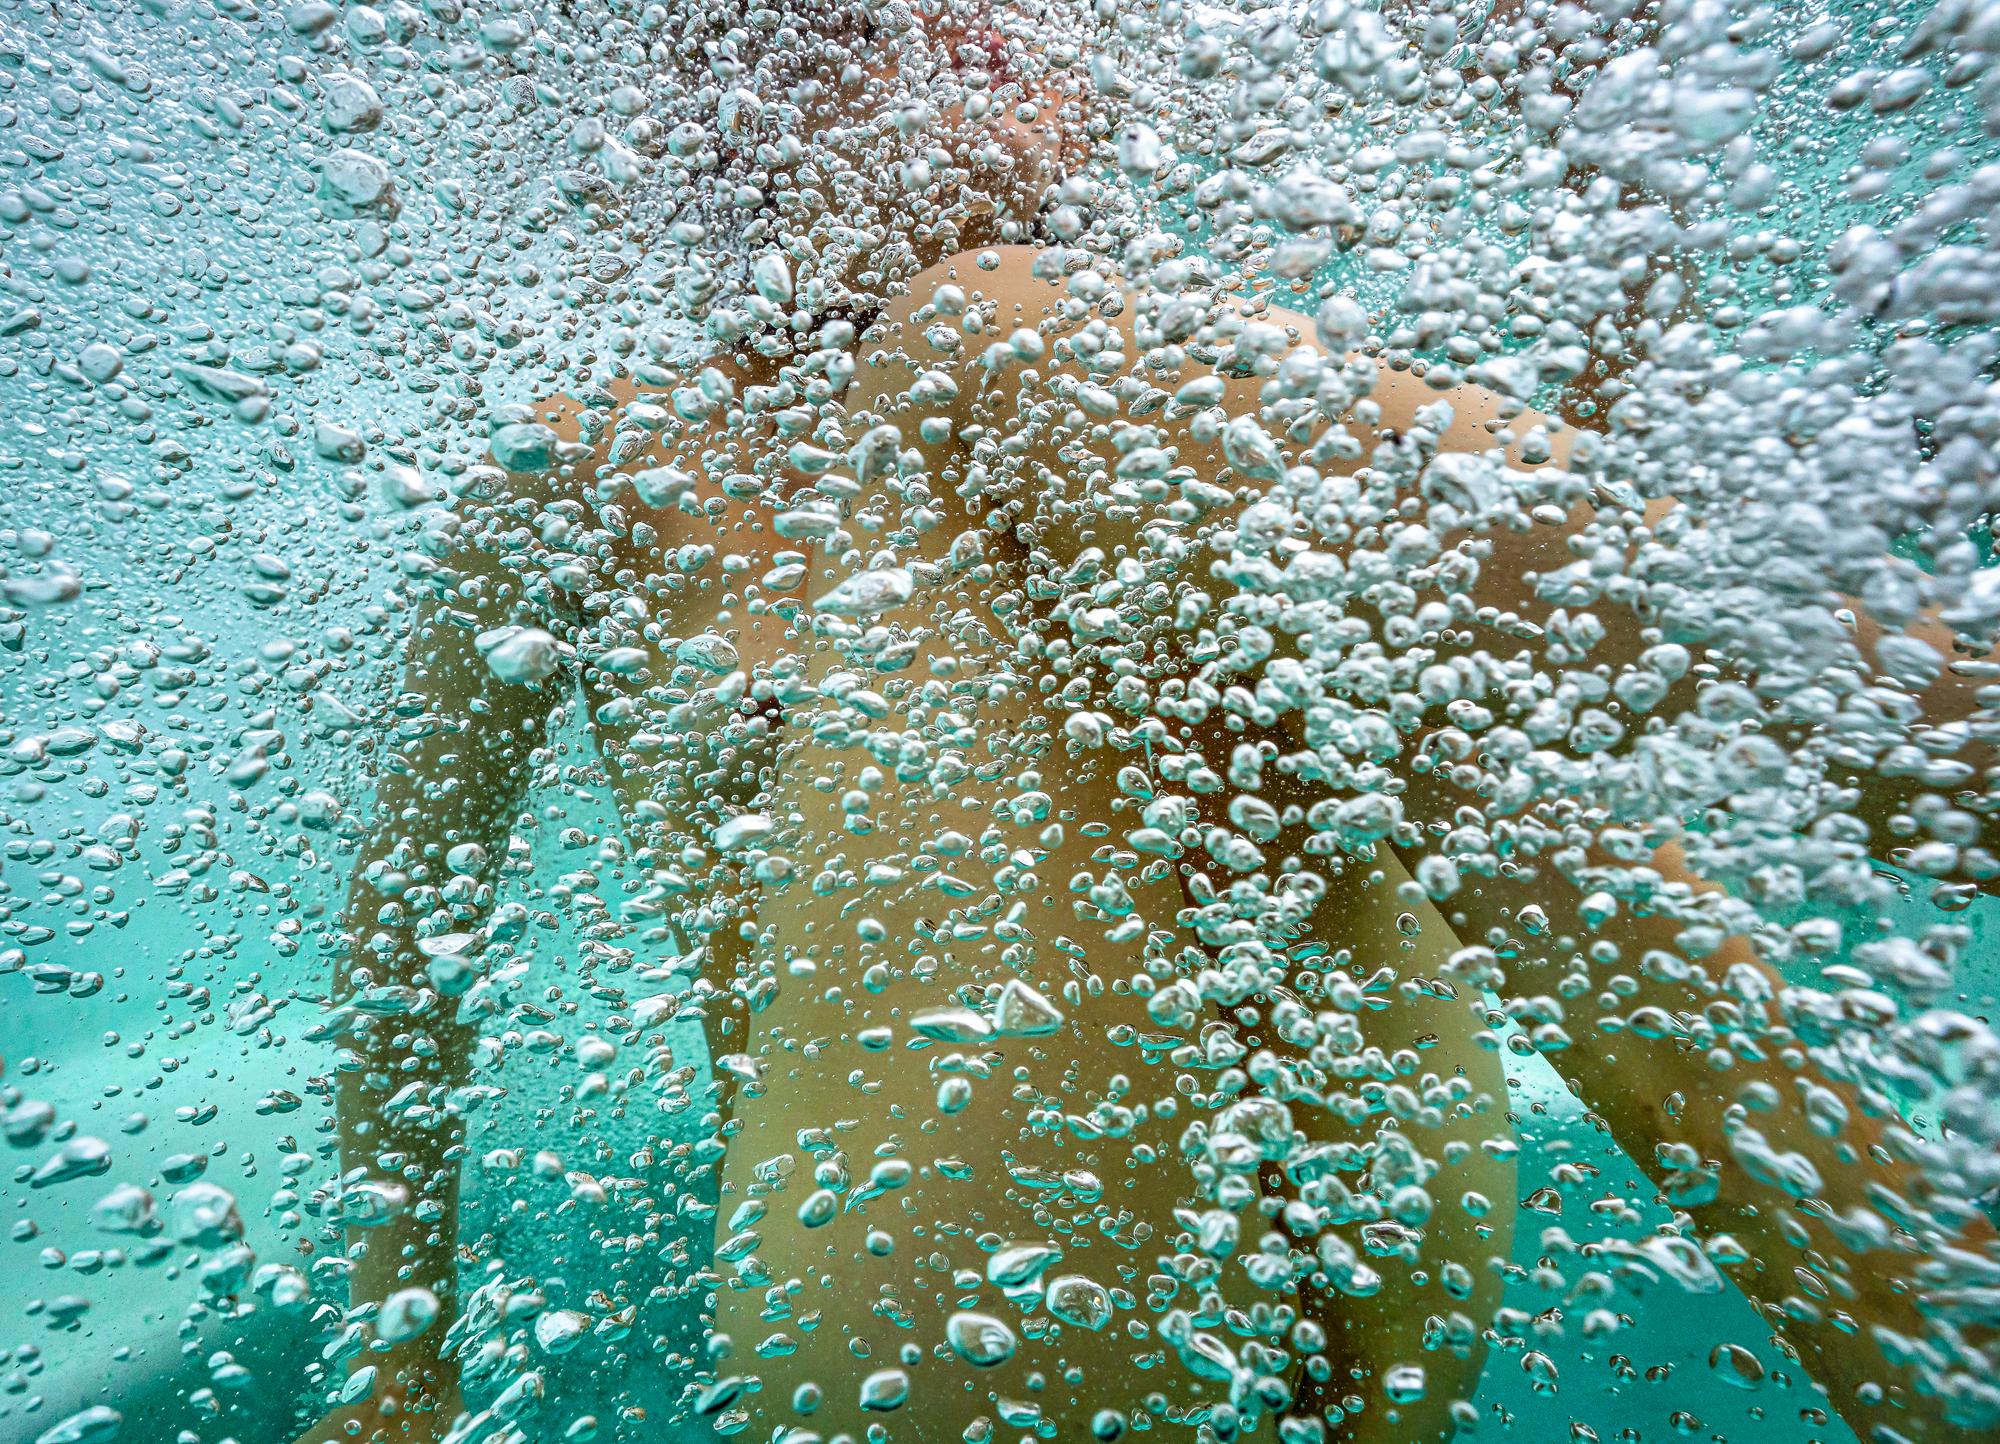 Alex Sher Figurative Photograph - Hot Champagne  - underwater nude photograph - print on aluminum 26" x 36"